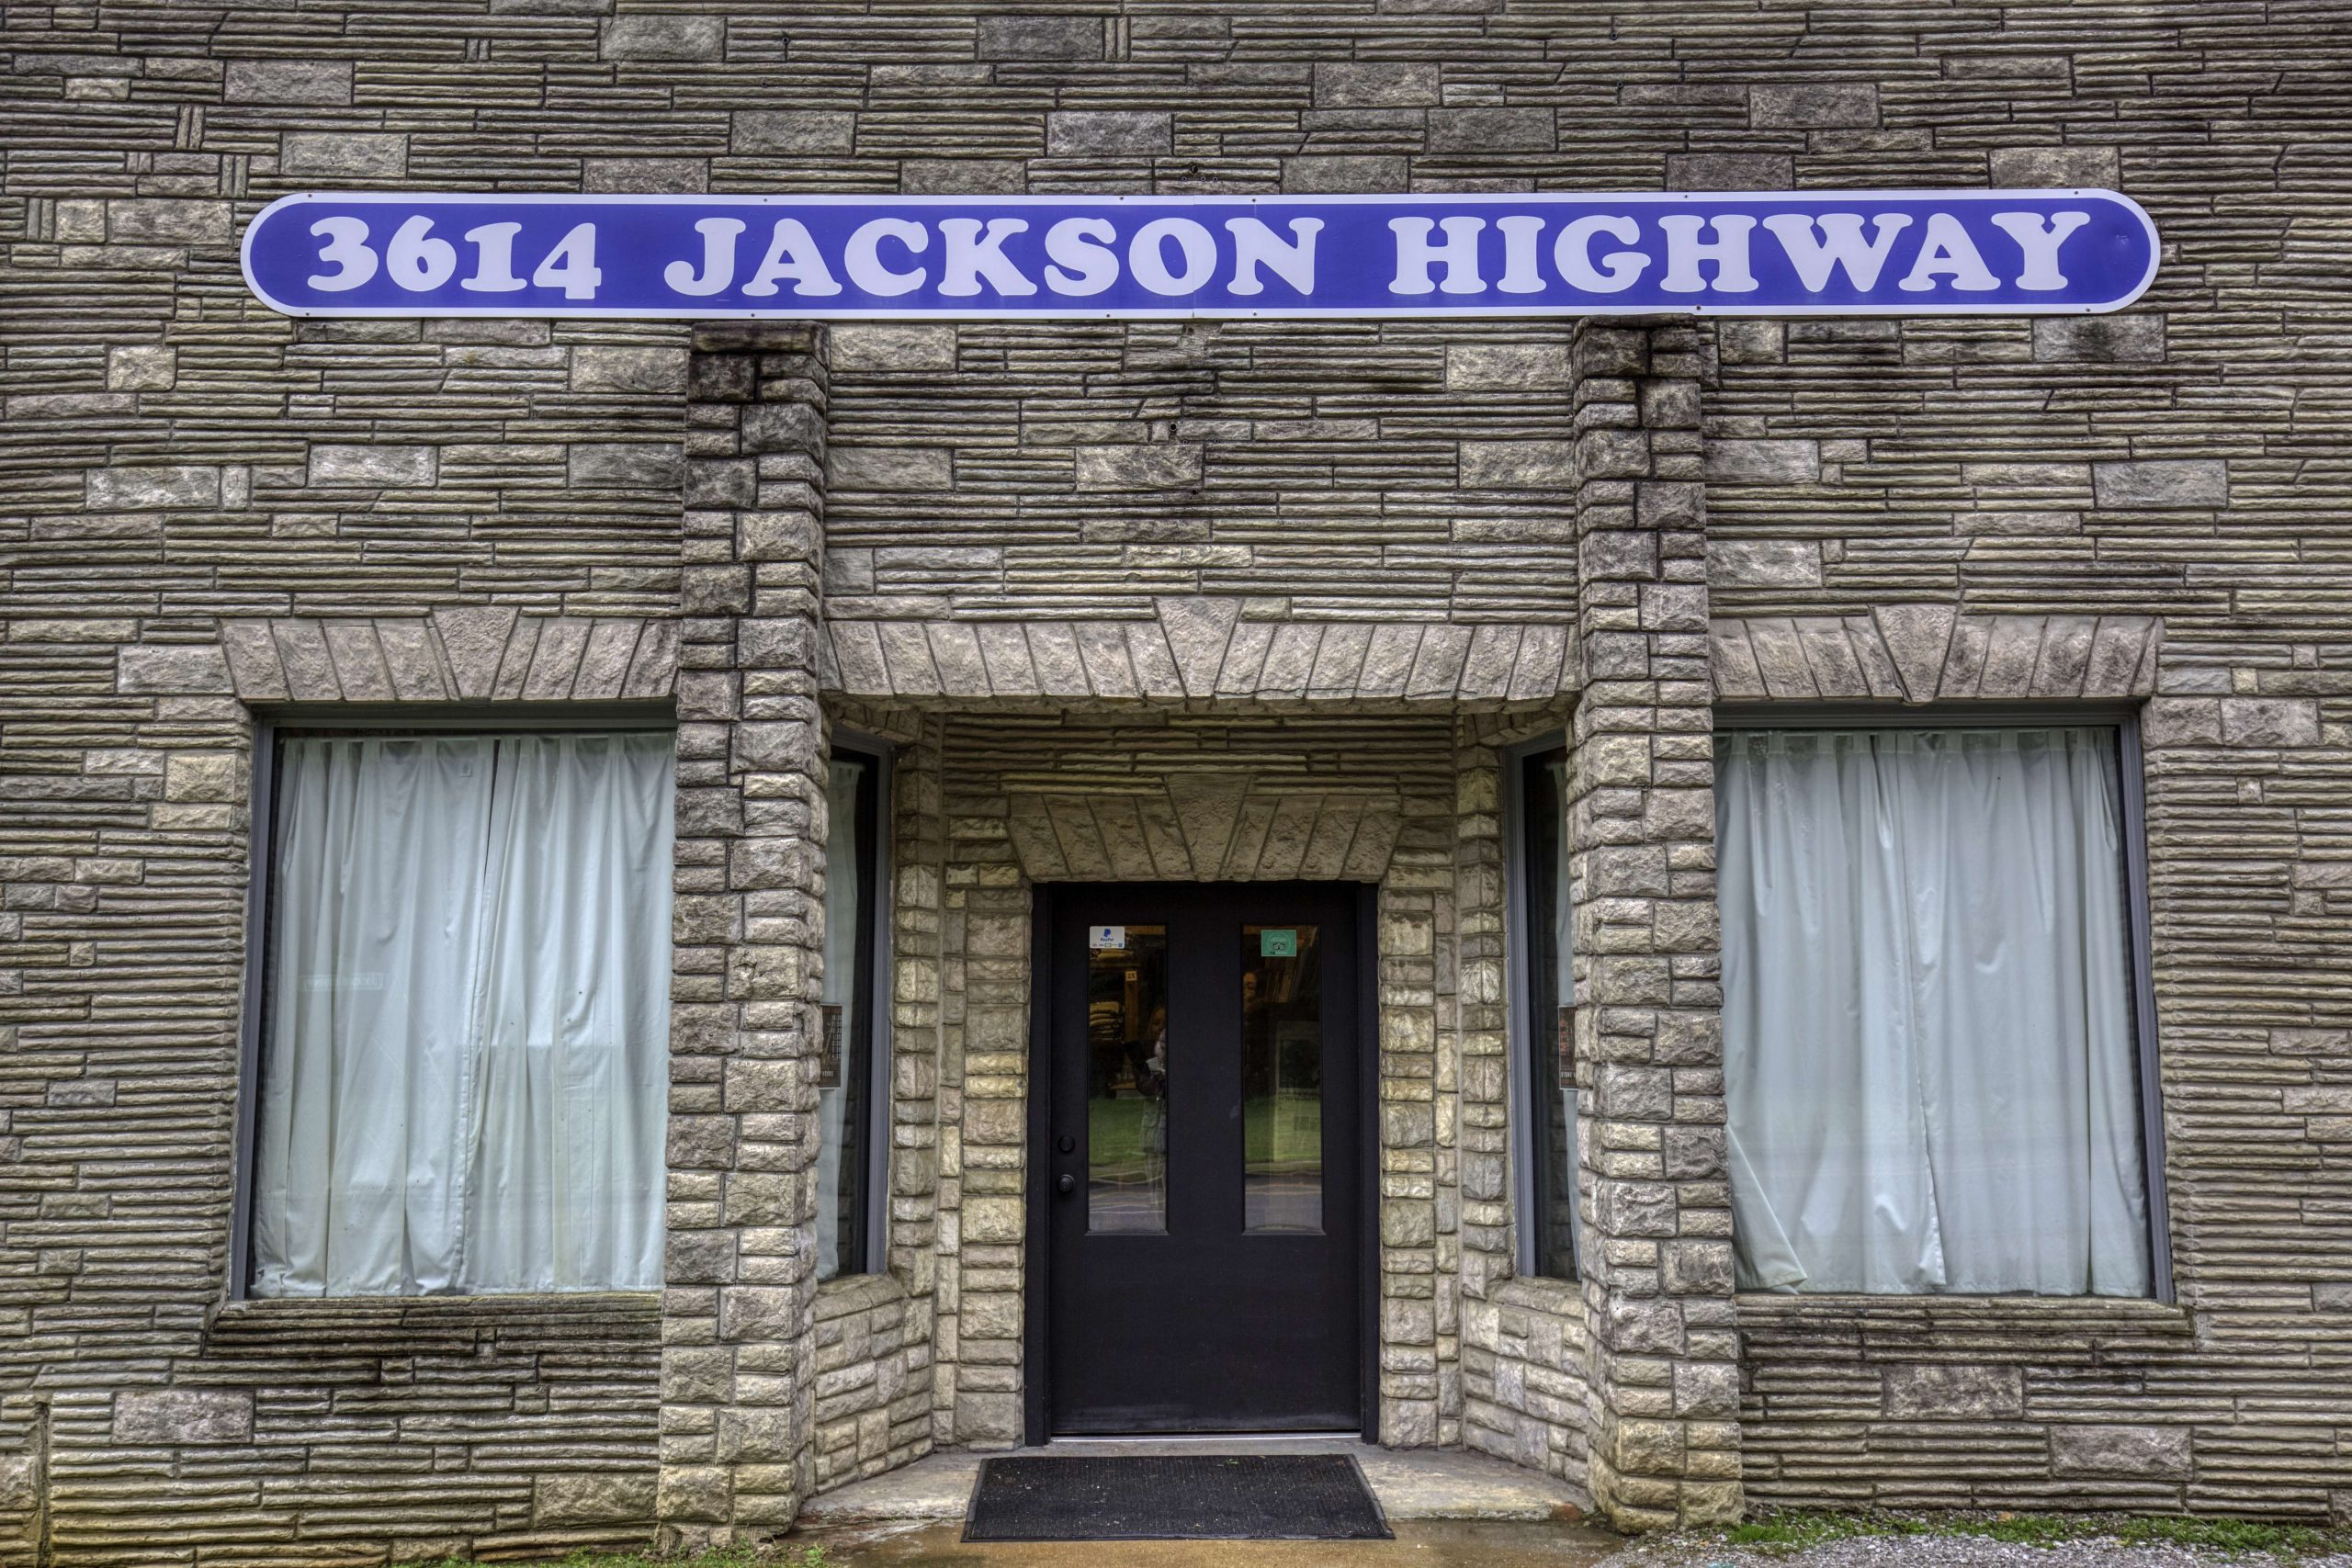 A few miles away, believe it or not, another soundtrack of the lives of millions of people: Muscle Shoals Sound Studio, AKA 3614 Jackson Highway which began life as a place where you would buy coffins for the cemetery that was across the street.